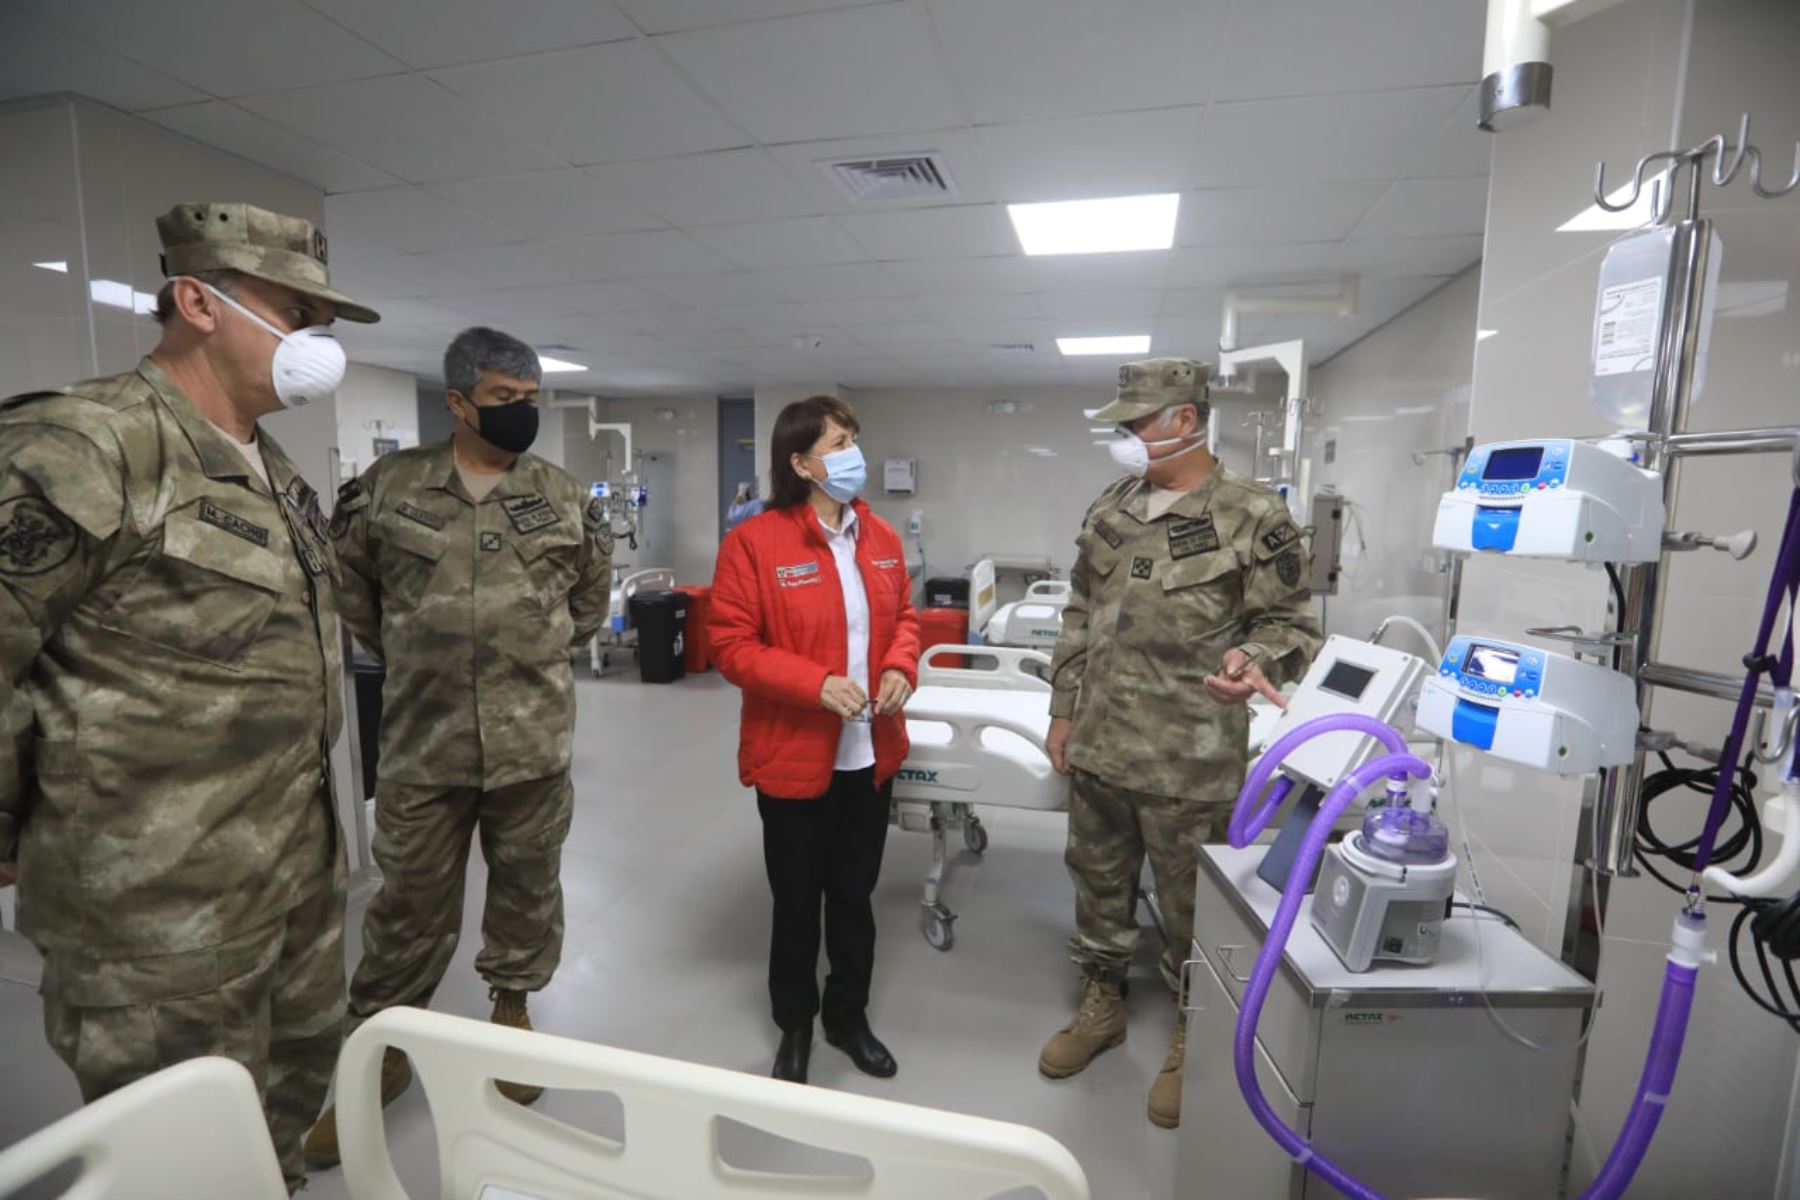 Ministers Pilar Mazzetti (Health) and Jorge Chavez (Defense) participated in the inauguration of the new Molecular Biology Laboratory at the Naval Hospital. Photo: ANDINA/MINSA